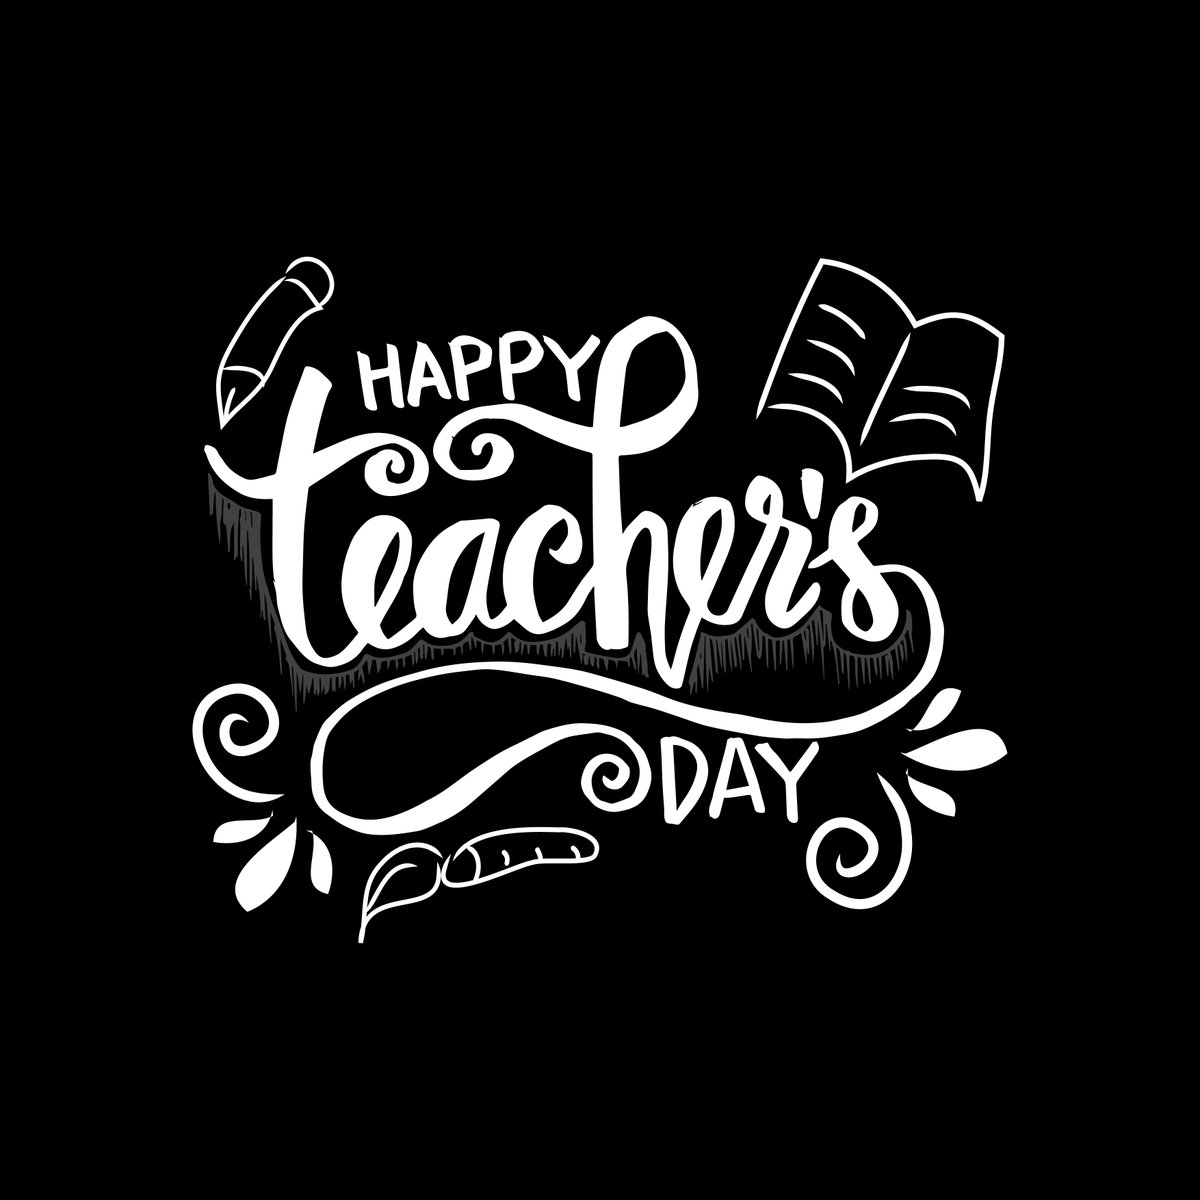 It's National Teacher's Day! Today is the perfect day to tell the teachers in your life how much they mean to you. If you're in need of some unique ideas, click the link. goodhousekeeping.com/holidays/gift-…

#Richlandcountysc #teachersrock #TeacherAppreciationDay #ideas @goodhousekeeping